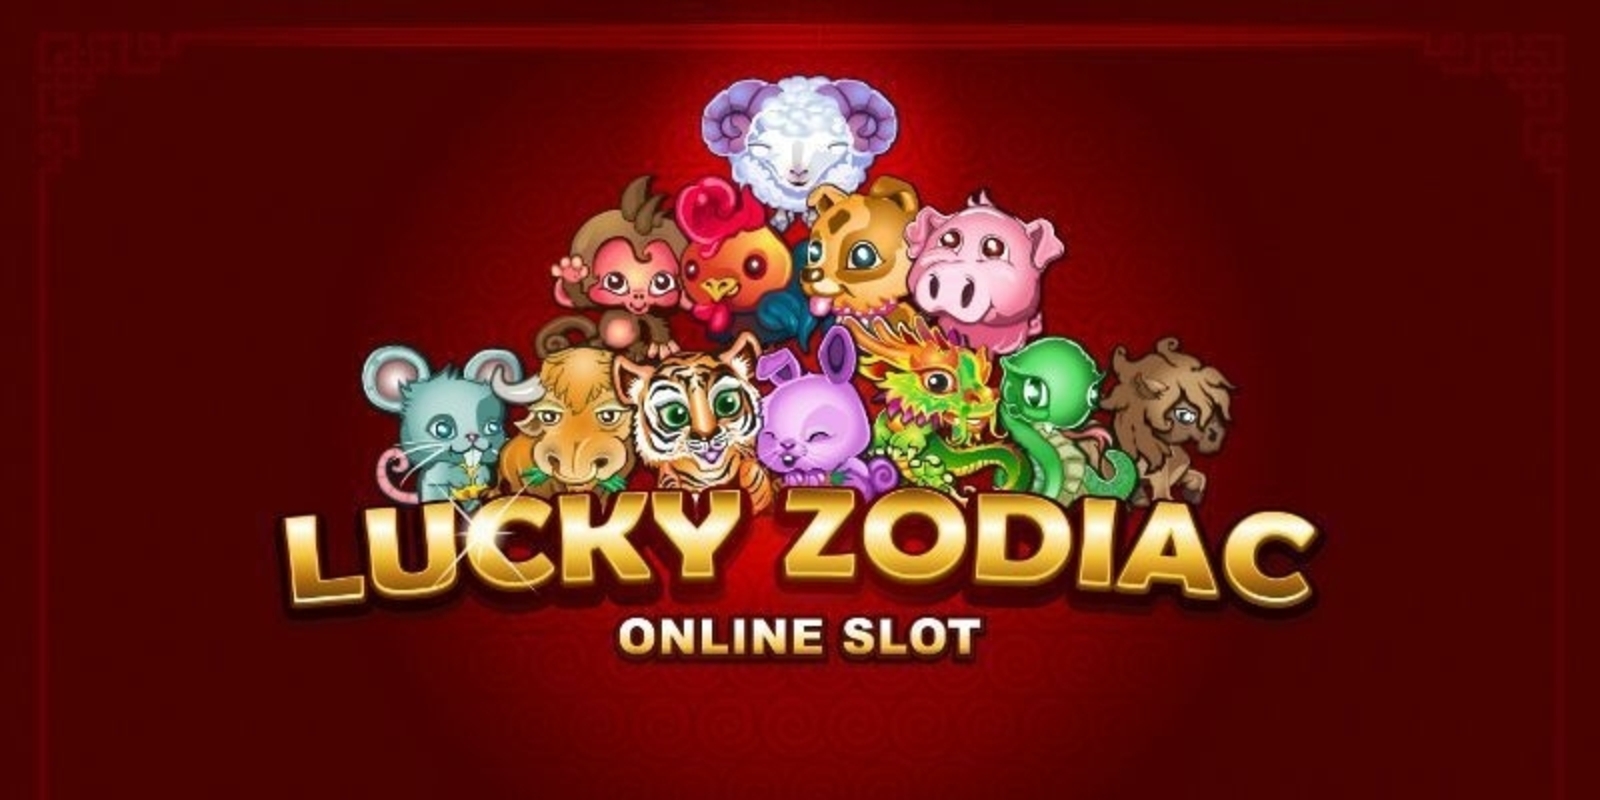 The Lucky Zodiac Online Slot Demo Game by Microgaming